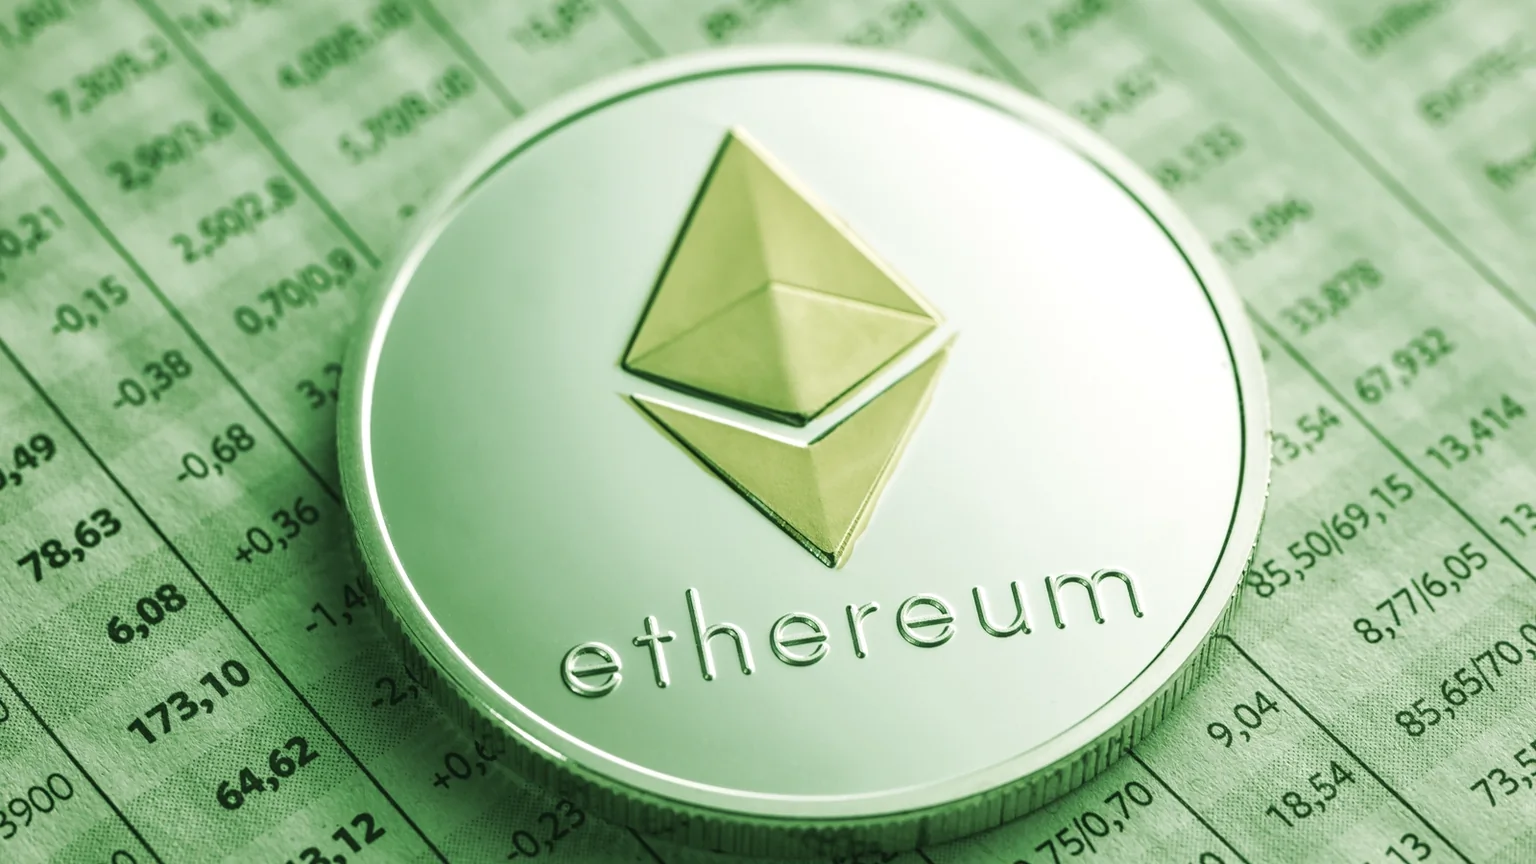 Ethereum hits new highs. Image: Shutterstock